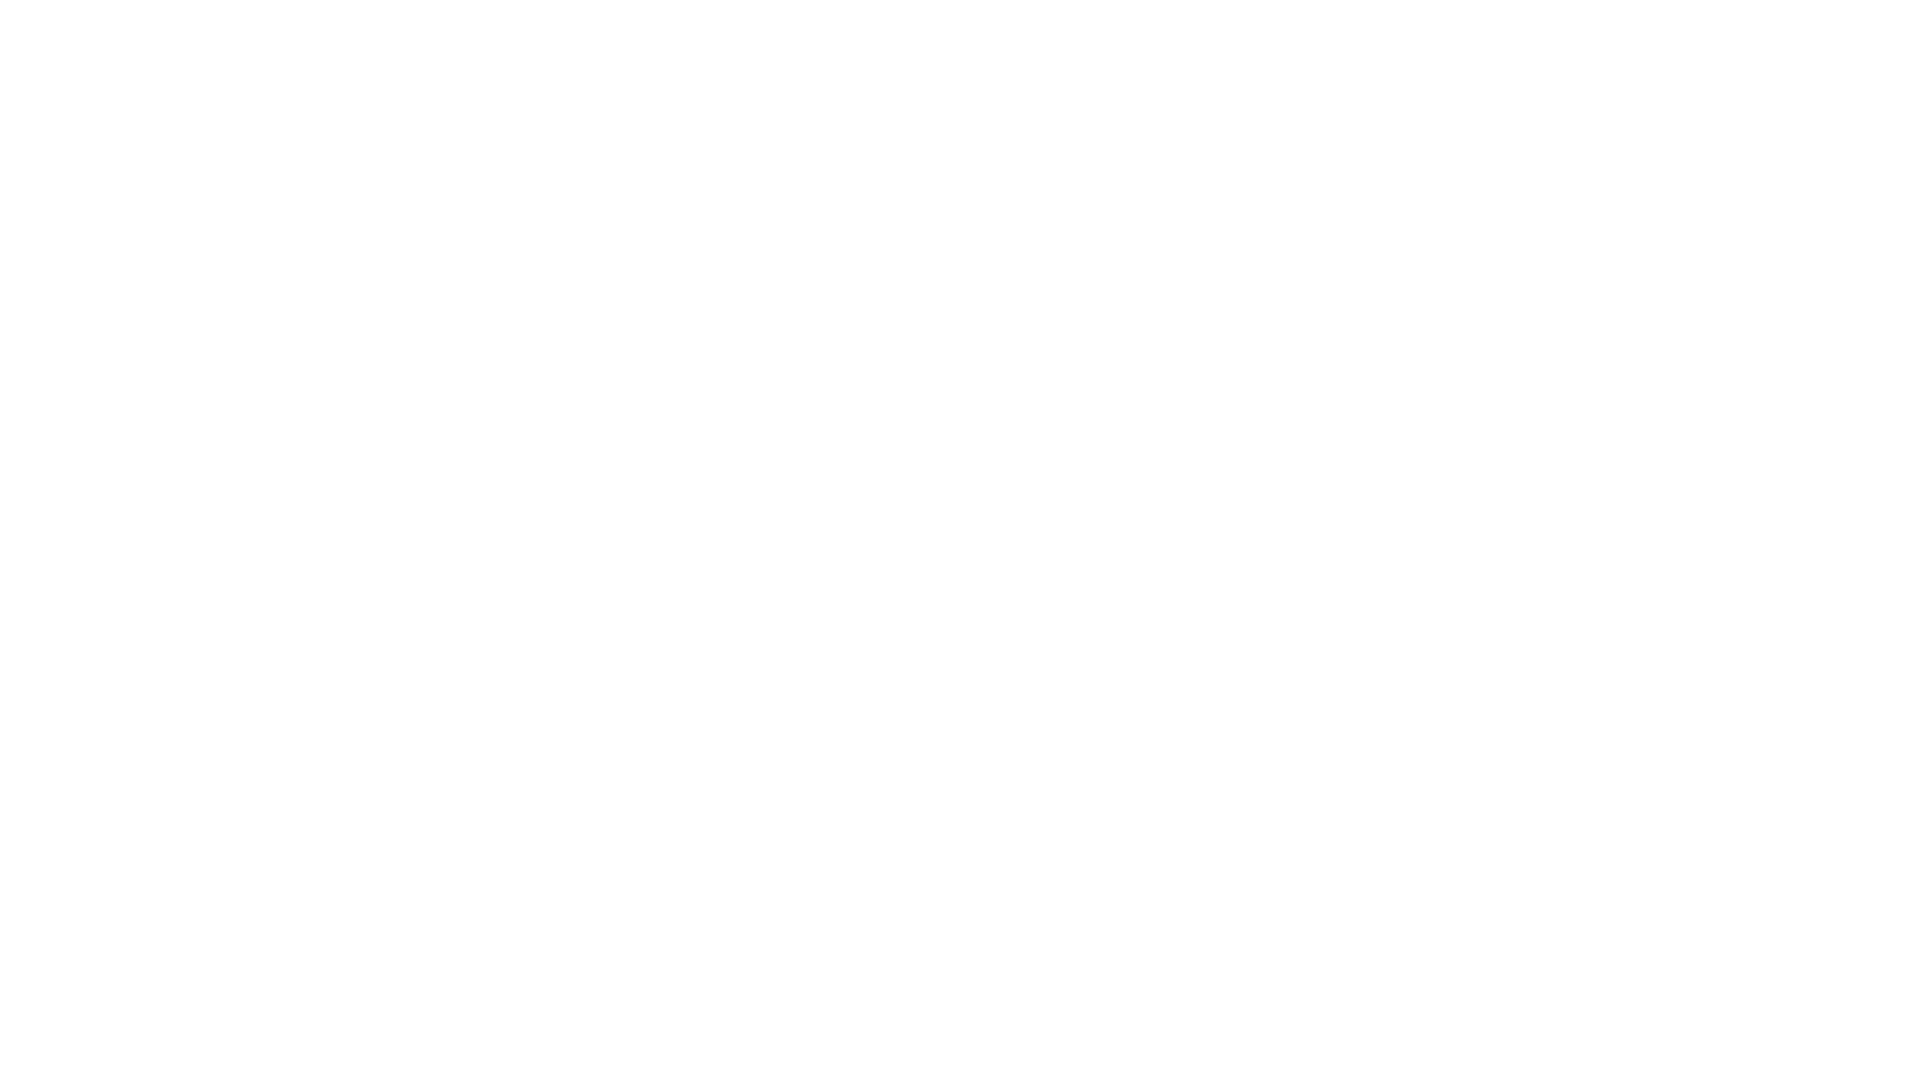 Image of the Recovery, Transformation and Resilience Plan logo